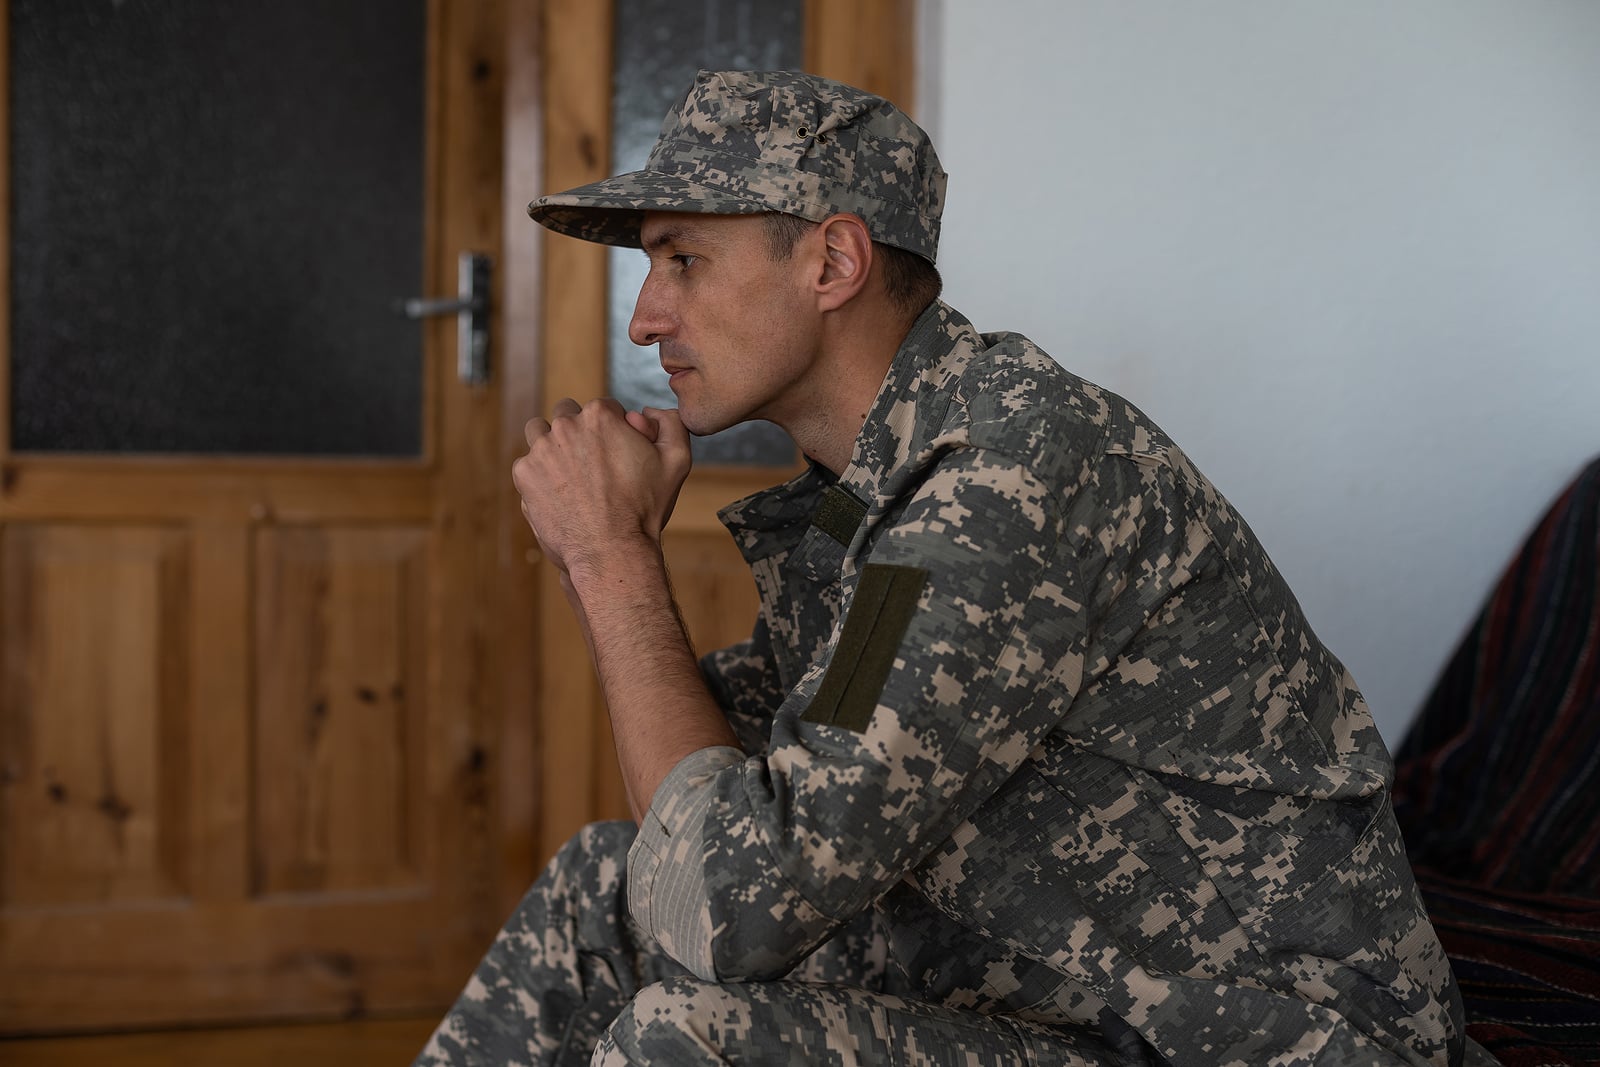 Is PTSD Considered a Permanent VA Disibility?